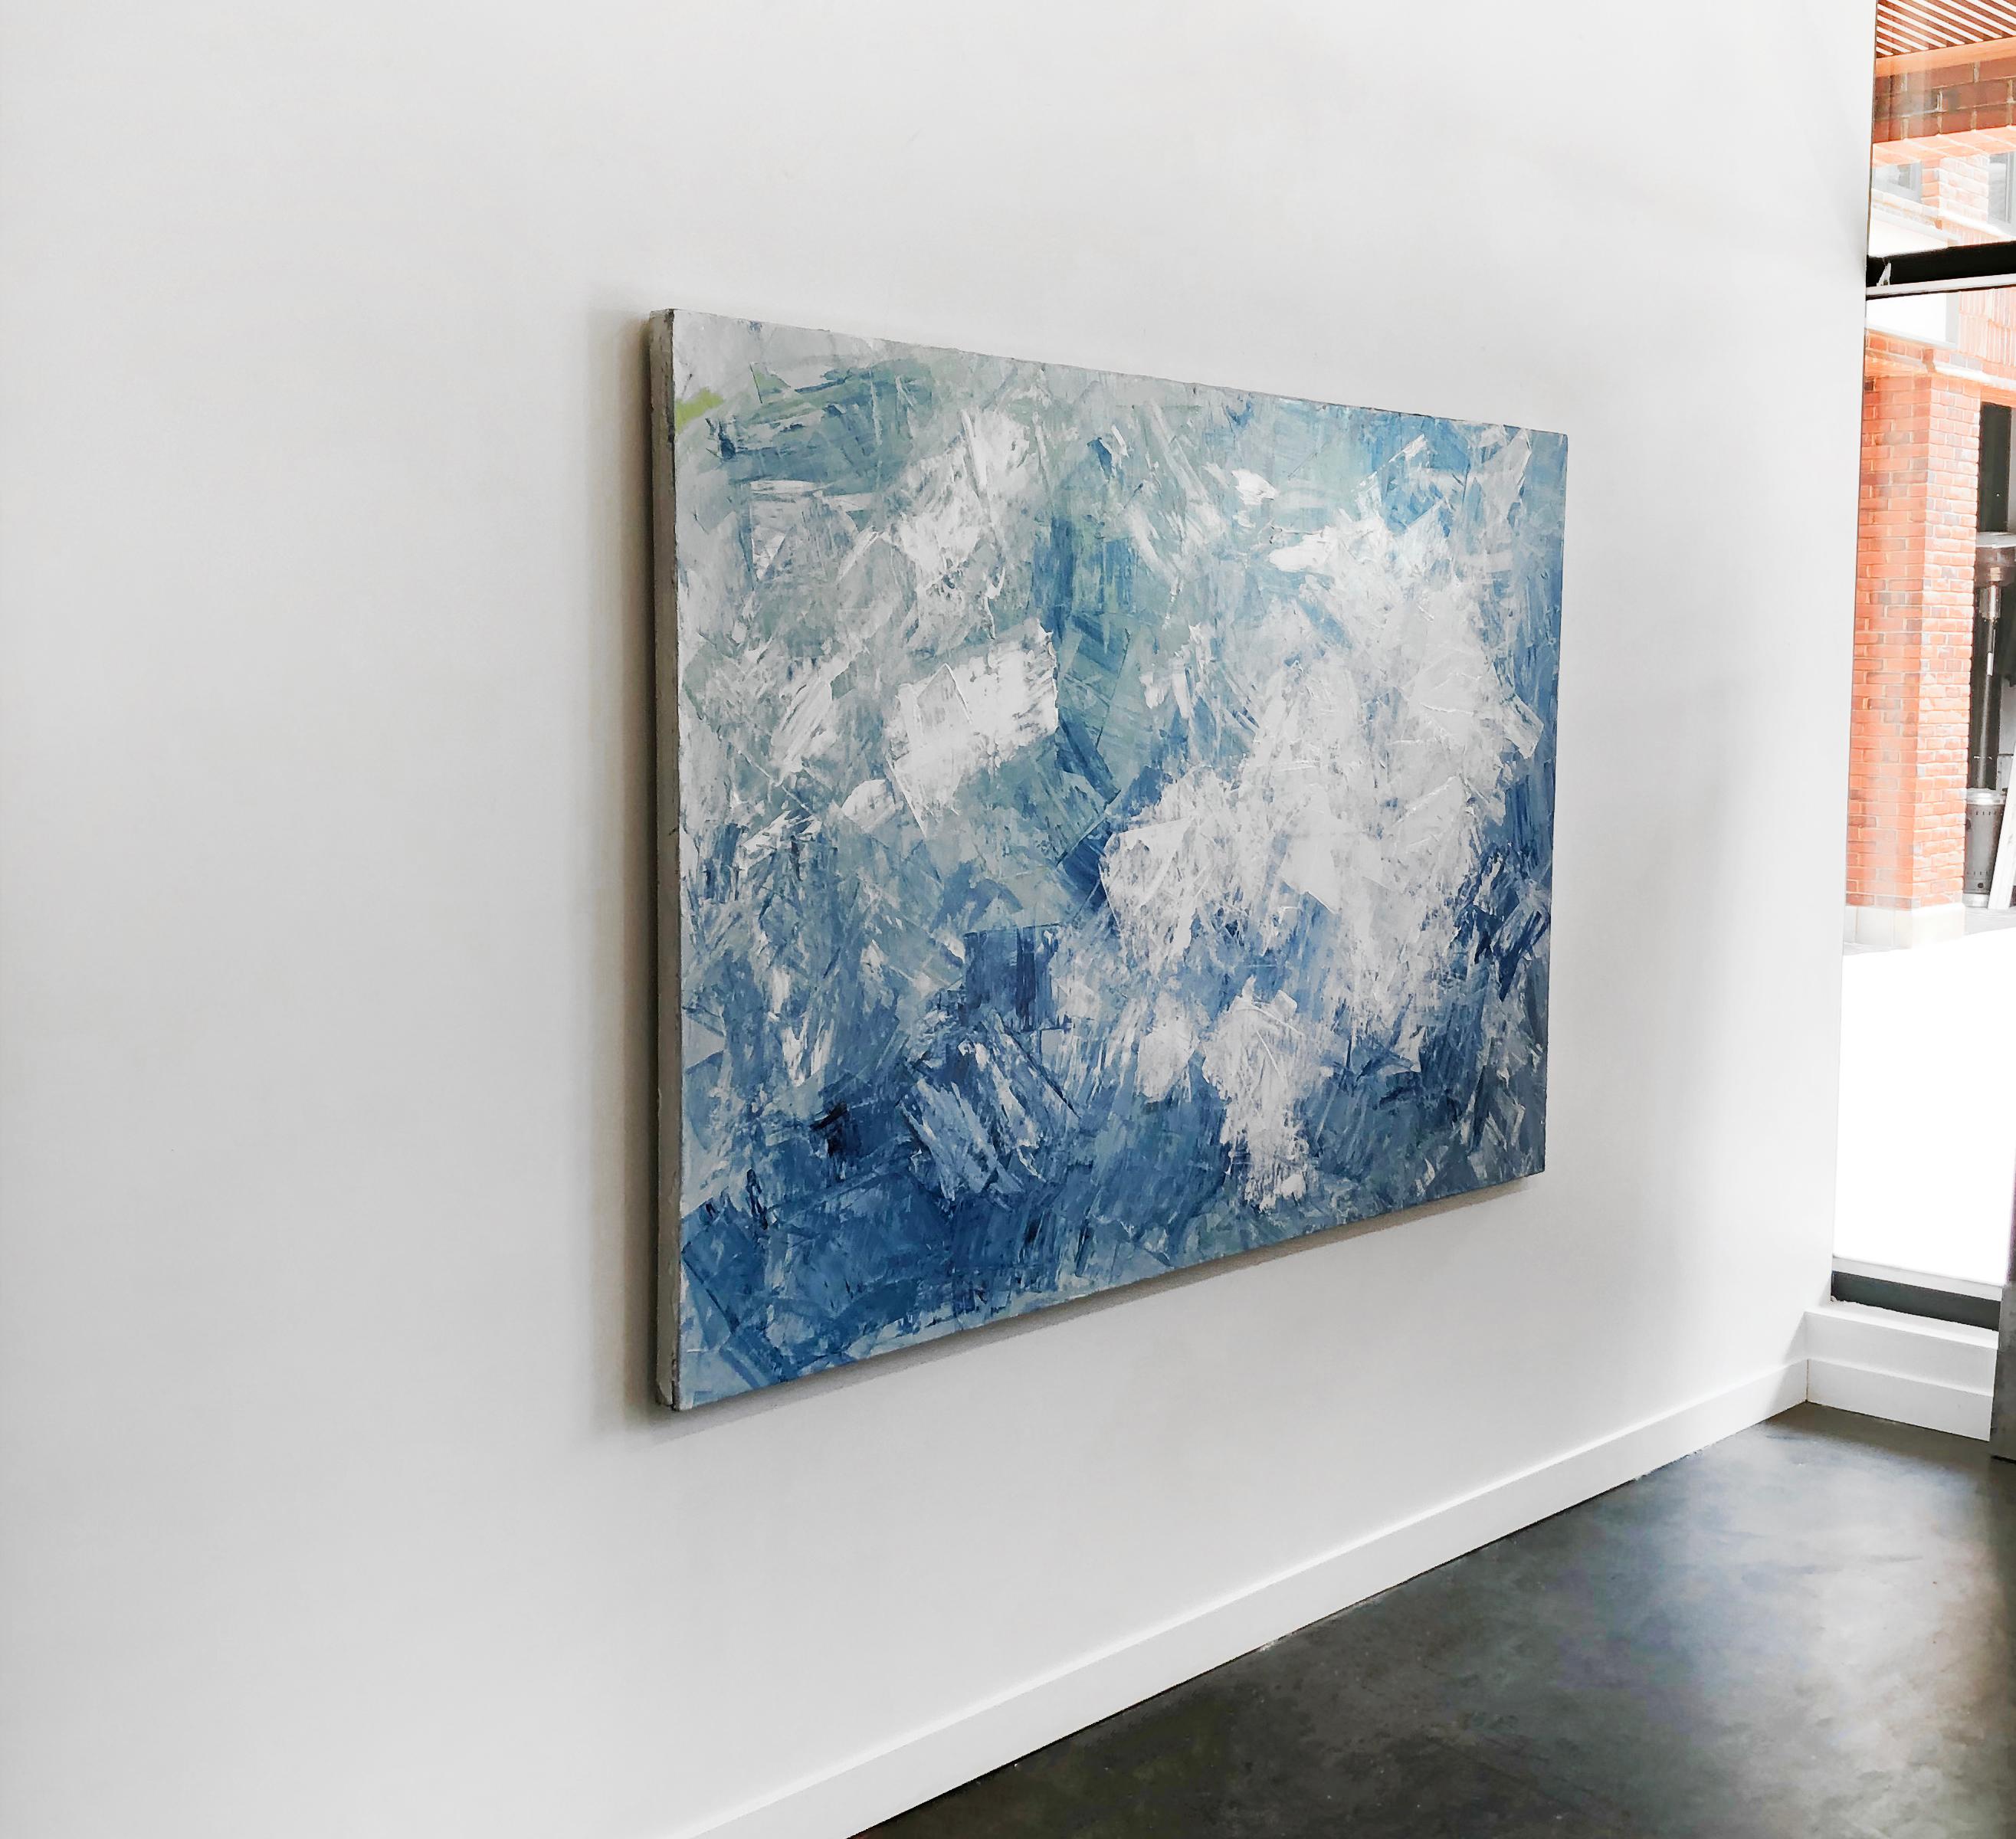 This large-scale, abstract statement painting is made with oil paint on canvas. The artist, Teodora Guererra, has layered paint onto the canvas using a palette knife, creating a highly textured abstract composition with elements of dark and powder